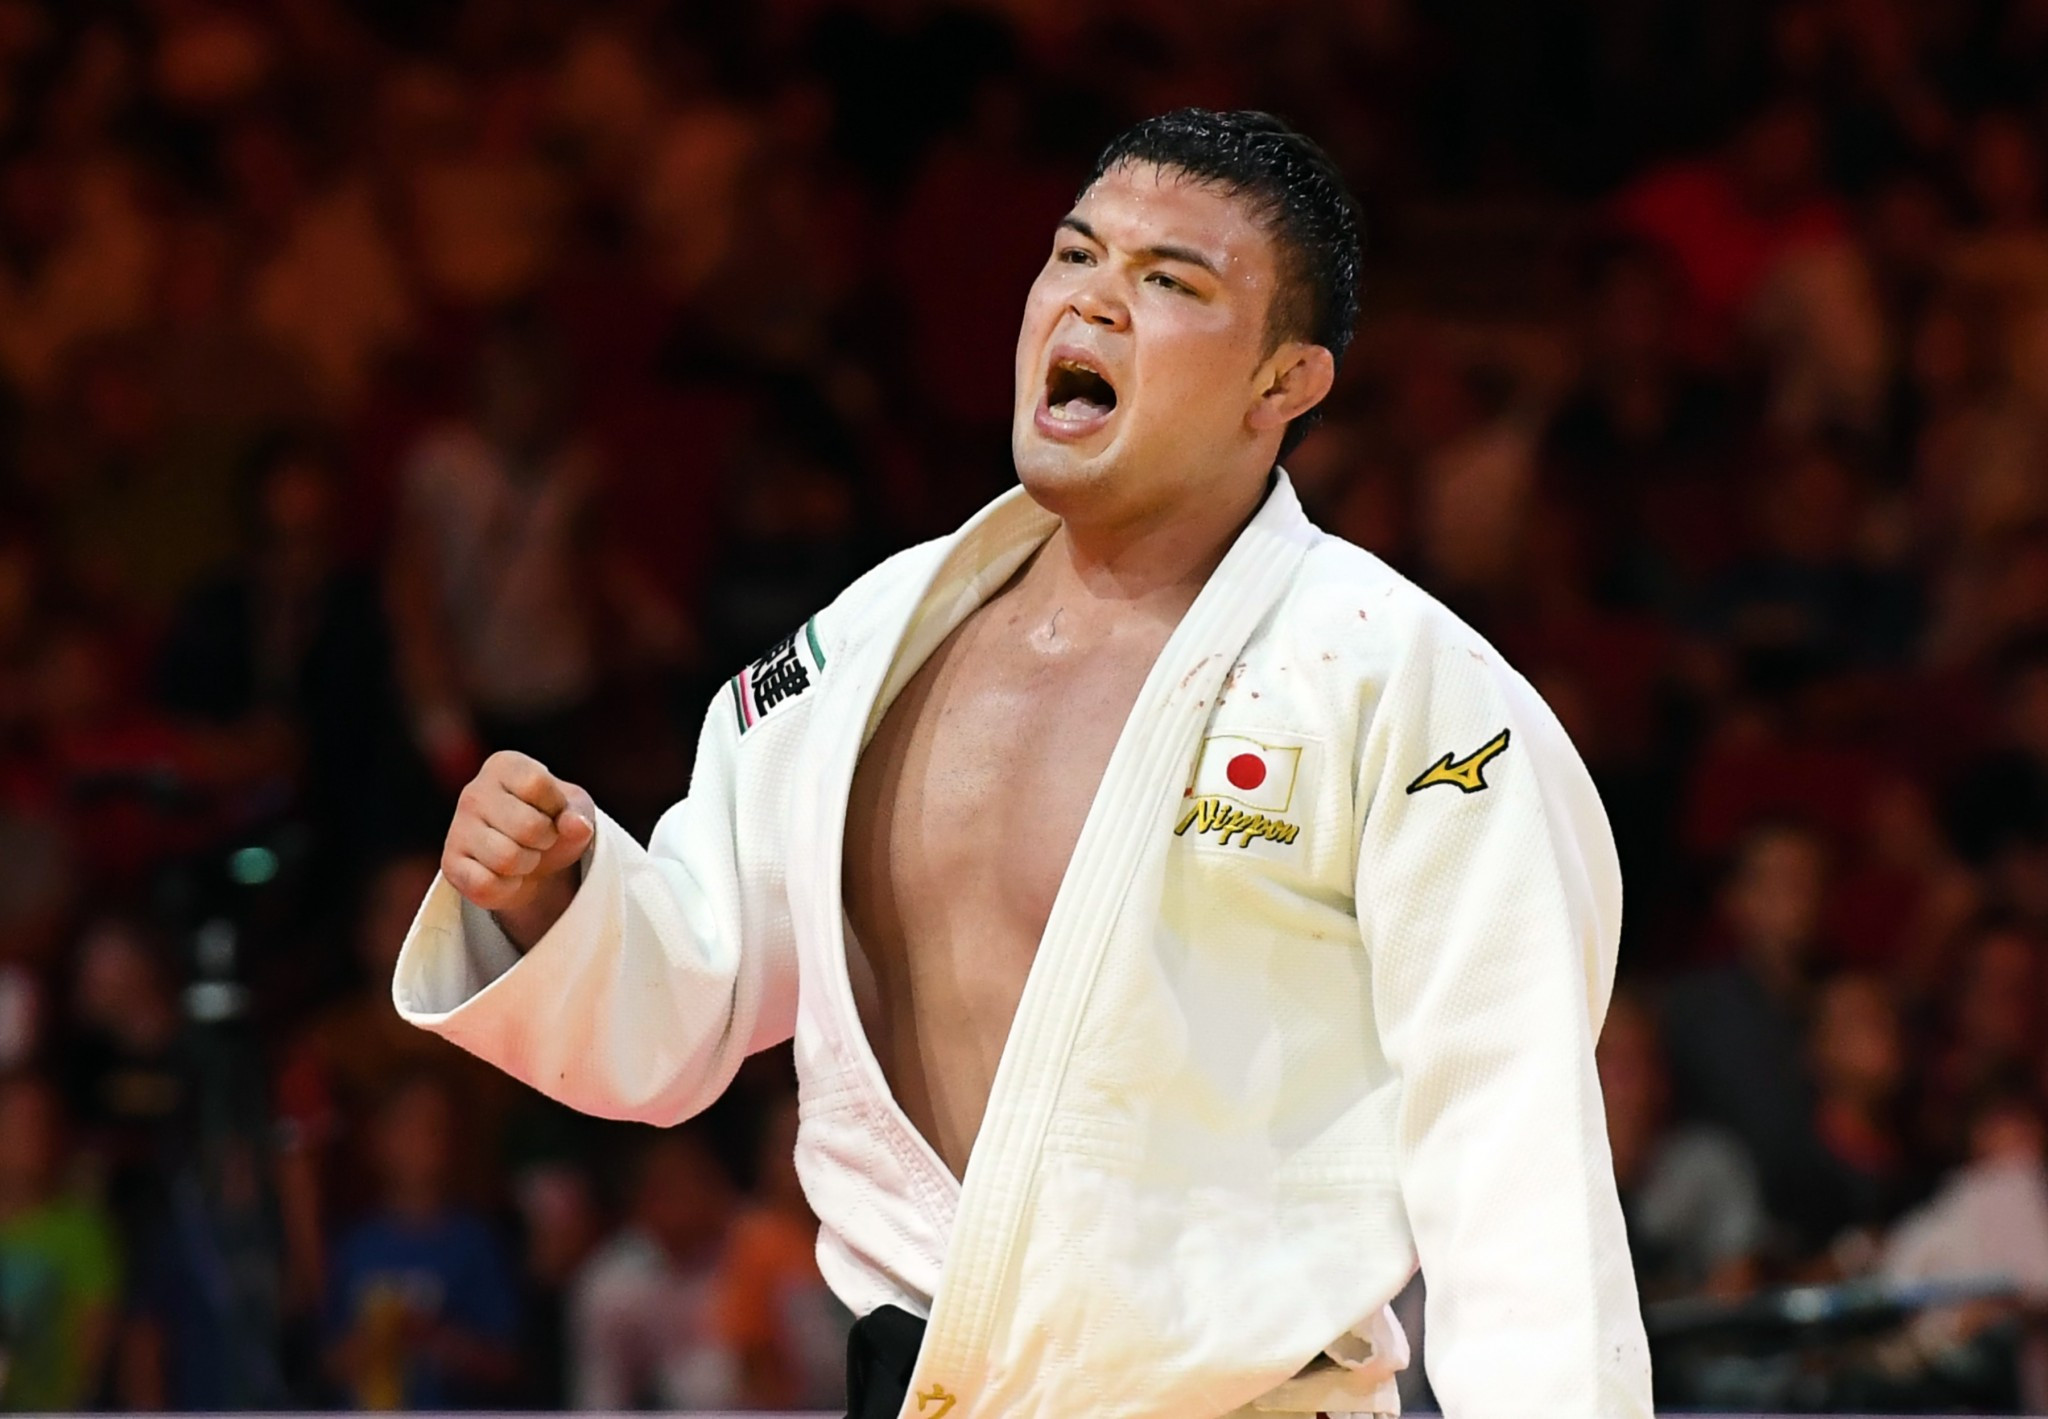 Wolf roars to claim seventh Japanese gold medal as Yu defends title at IJF World Championships